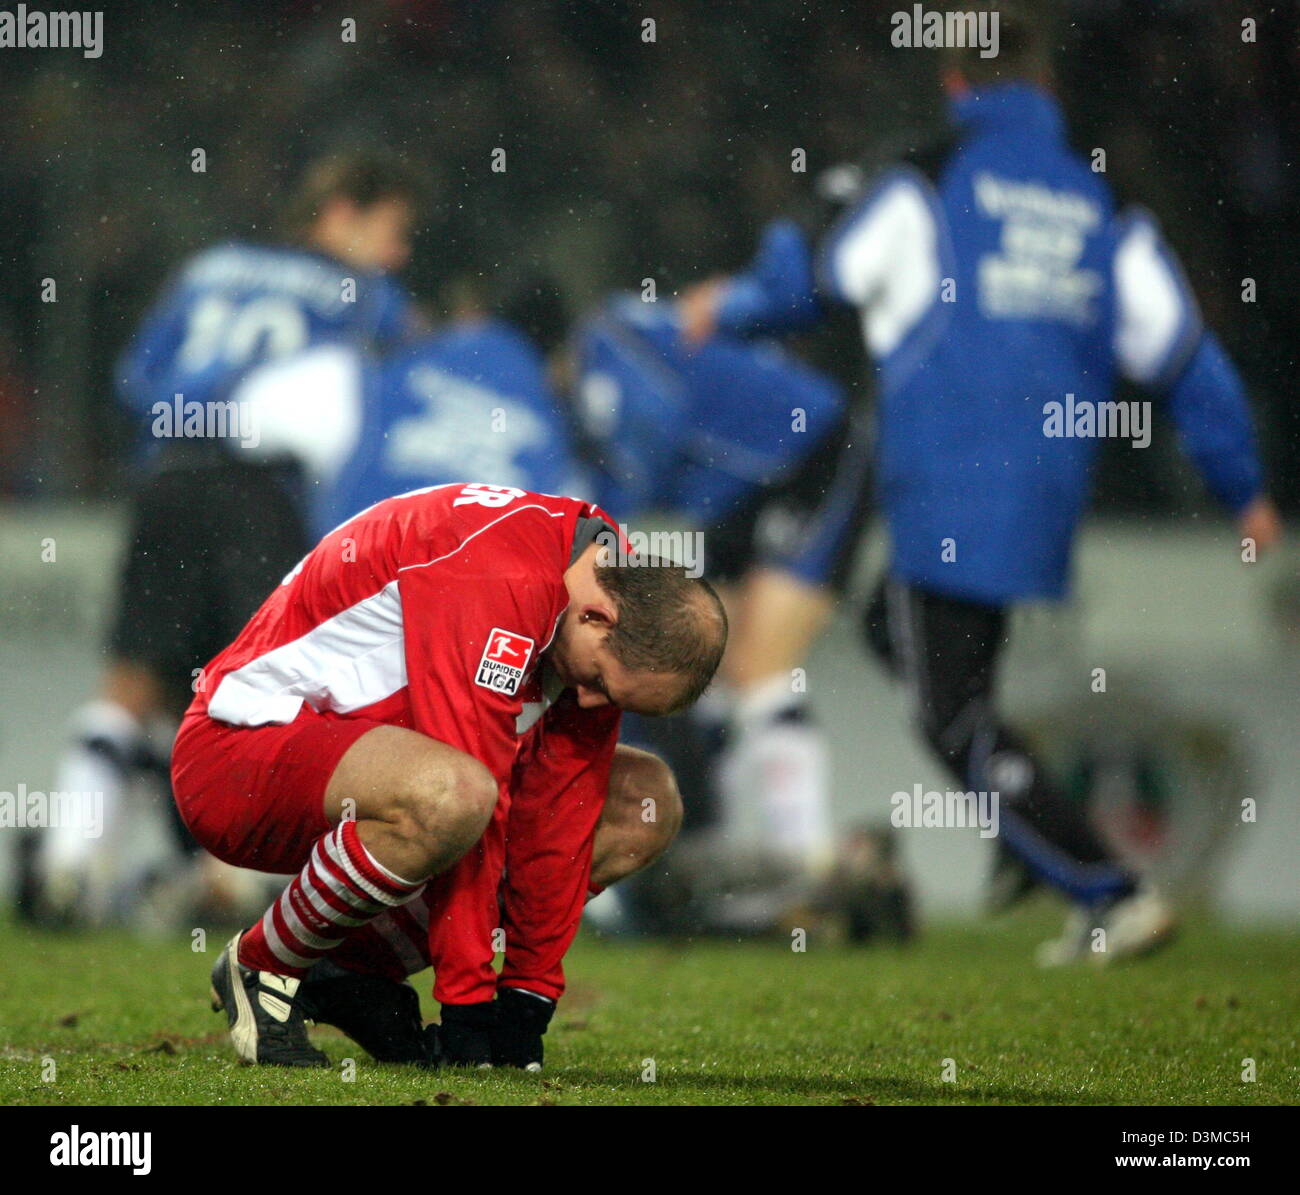 Kickers Offenbach's Stephan Sieger (front) moans about his team's defeat at the German Cup quarter-finals soccer match against Arminia Bielefeld at the Schueco Arena stadium in Bielefeld, Germany, Wednesday 25 January 2006. Sieger failed to score from the penalty spot. In the background cheer players of Bielefeld. Around 12,000 spectators watched Bielefeld advance to the semi-final Stock Photo